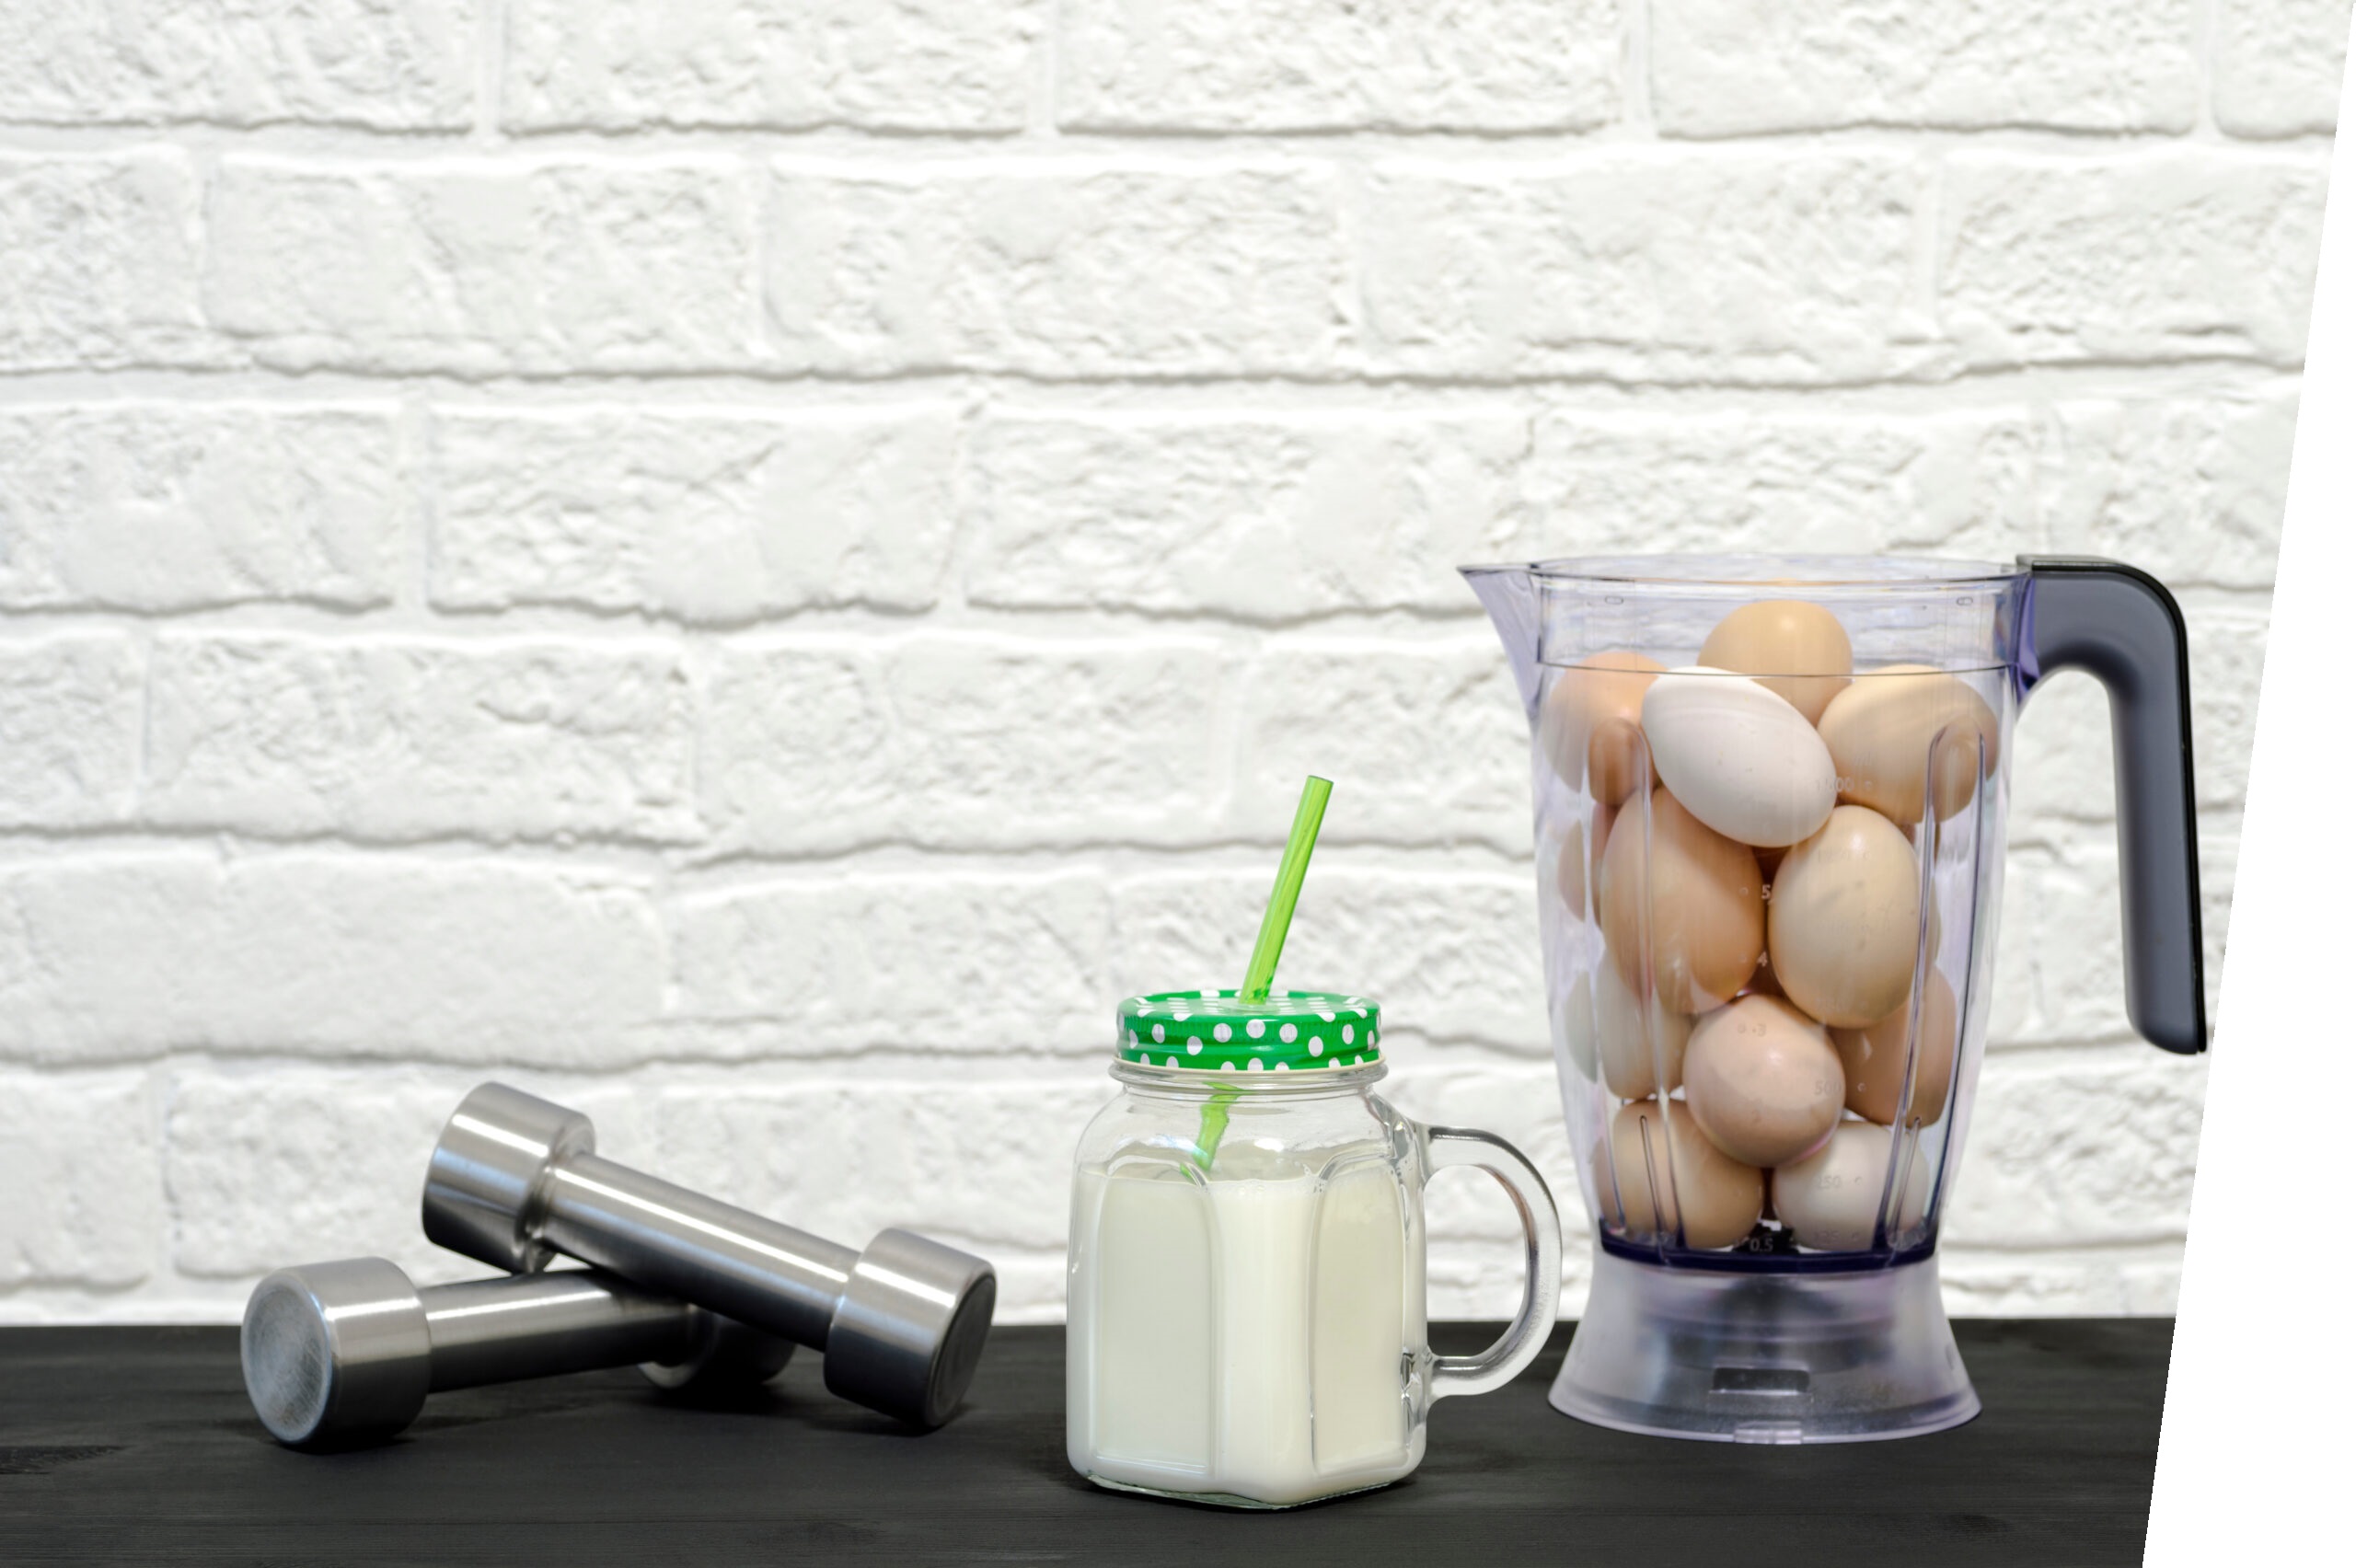 Protein shake in a mug against the background of a blender bowl with chicken eggs and dumbbells against a white wall.